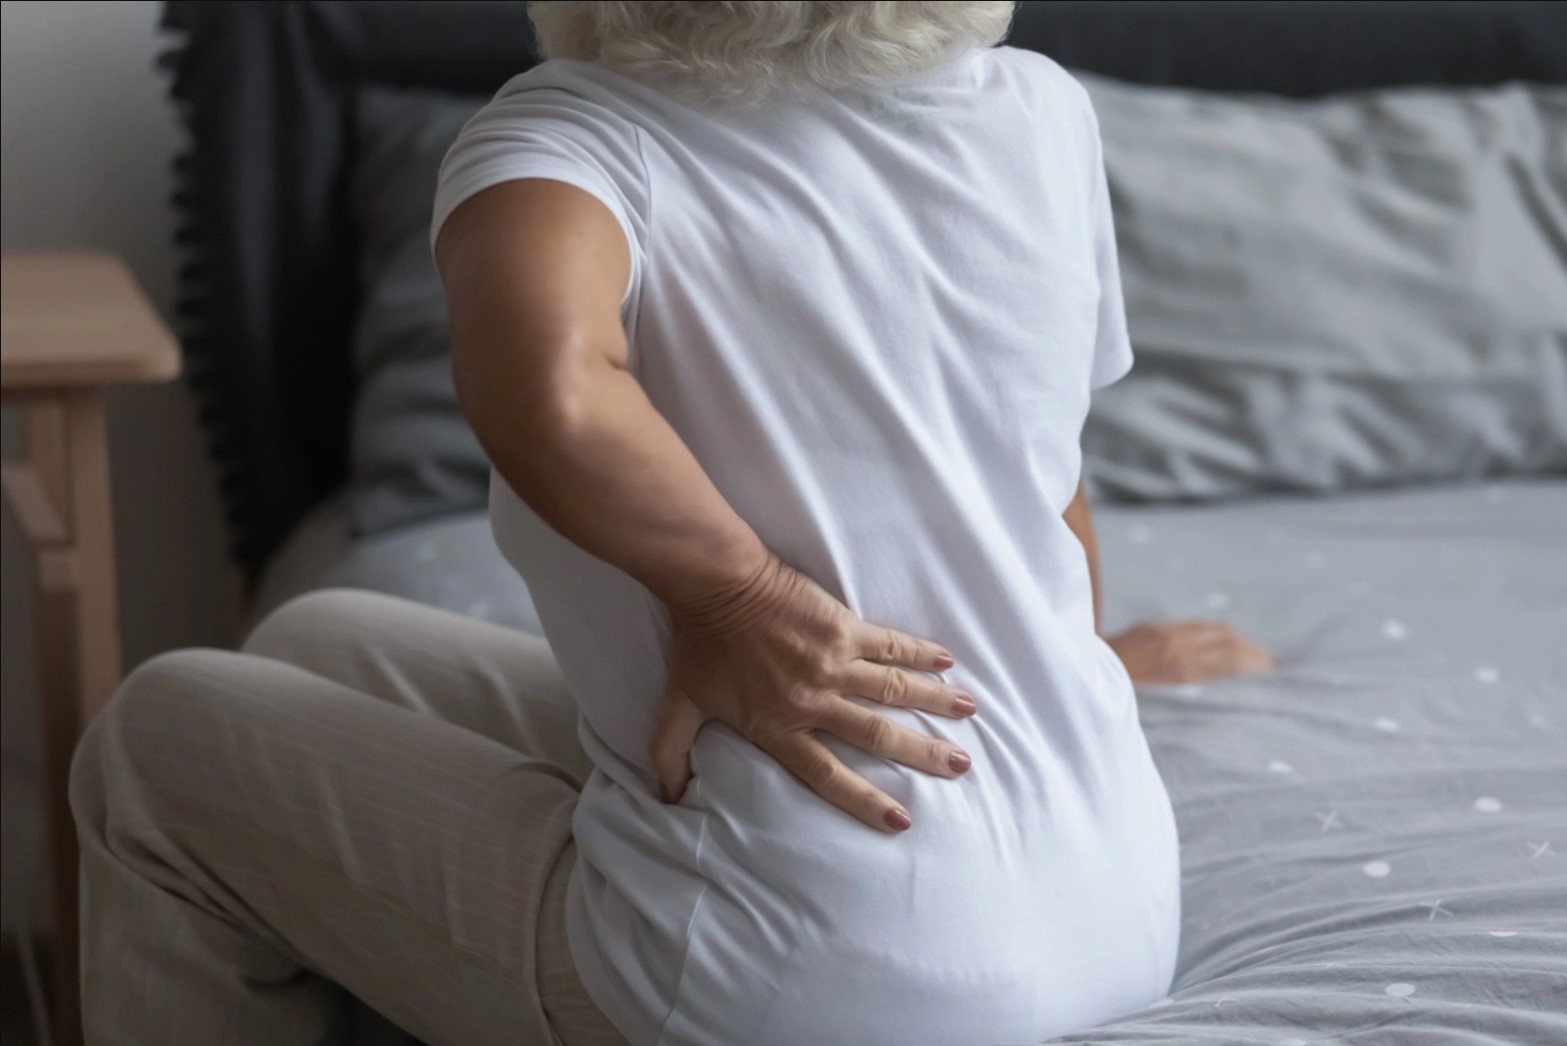 Massage can alleviate sciatic pain - Home Comfort Therapy